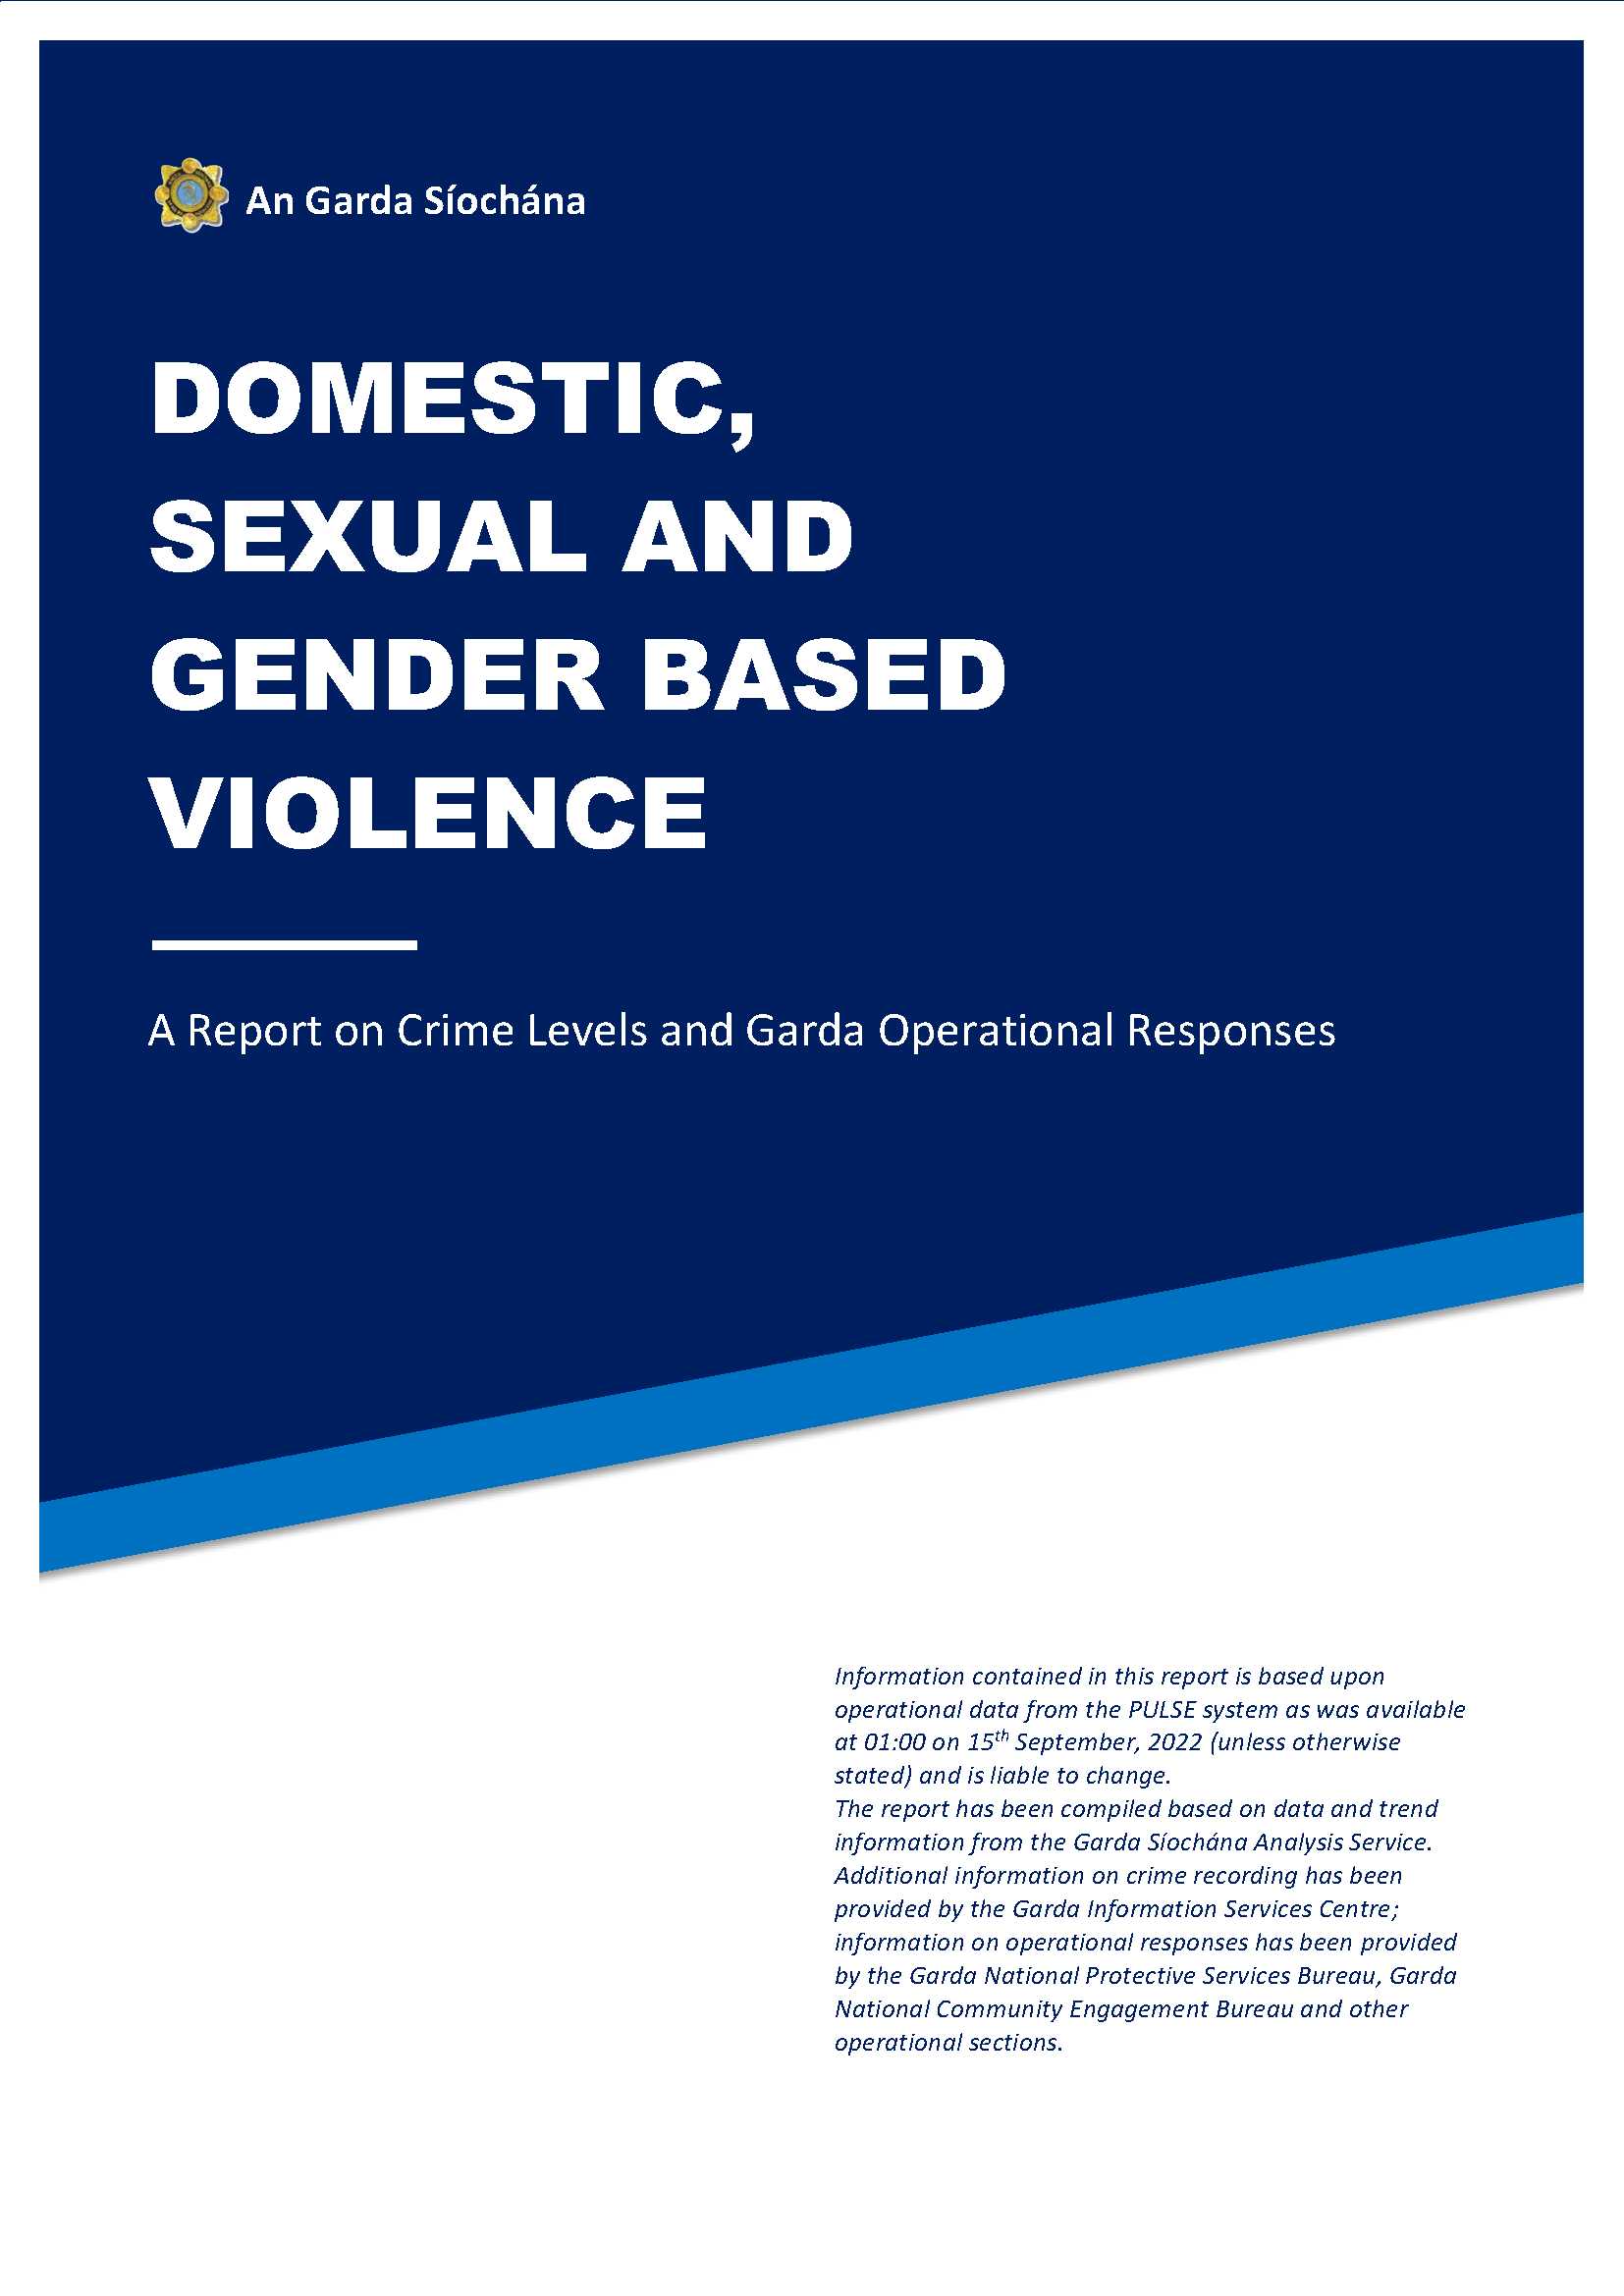 /garda/en/about-us/our-departments/office-of-corporate-communications/news-media/an_garda_siochana_domestic_sexual_and_gender_based_violence_report_sept_22.jpg